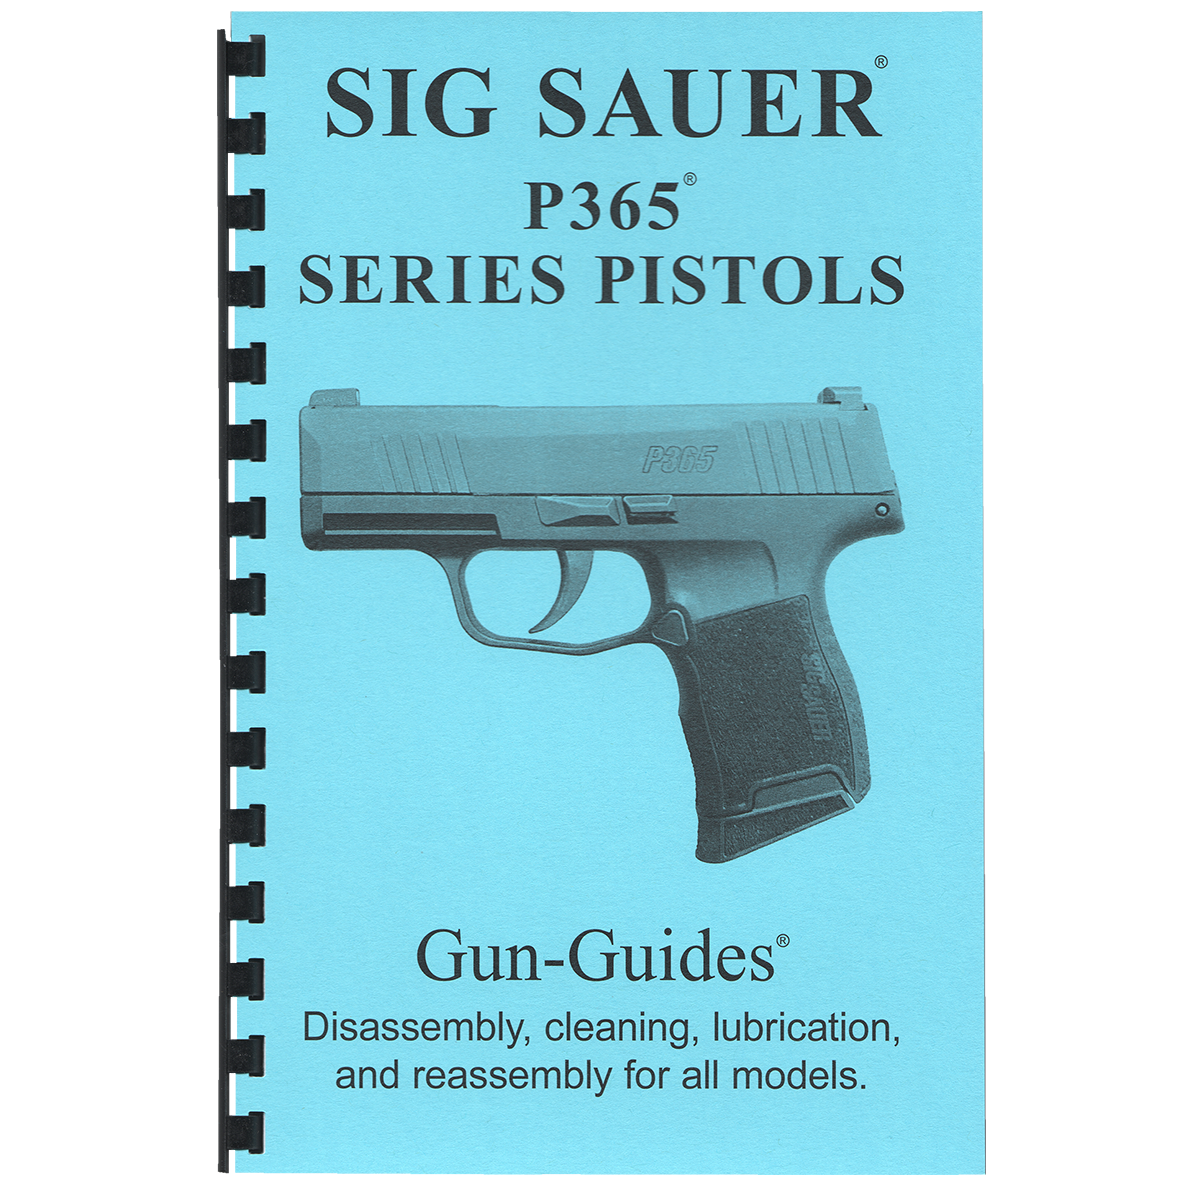 SIG SAUER P365 SERIES PISTOLS Disassembly, cleaning, lubrication and reassembly for all models.